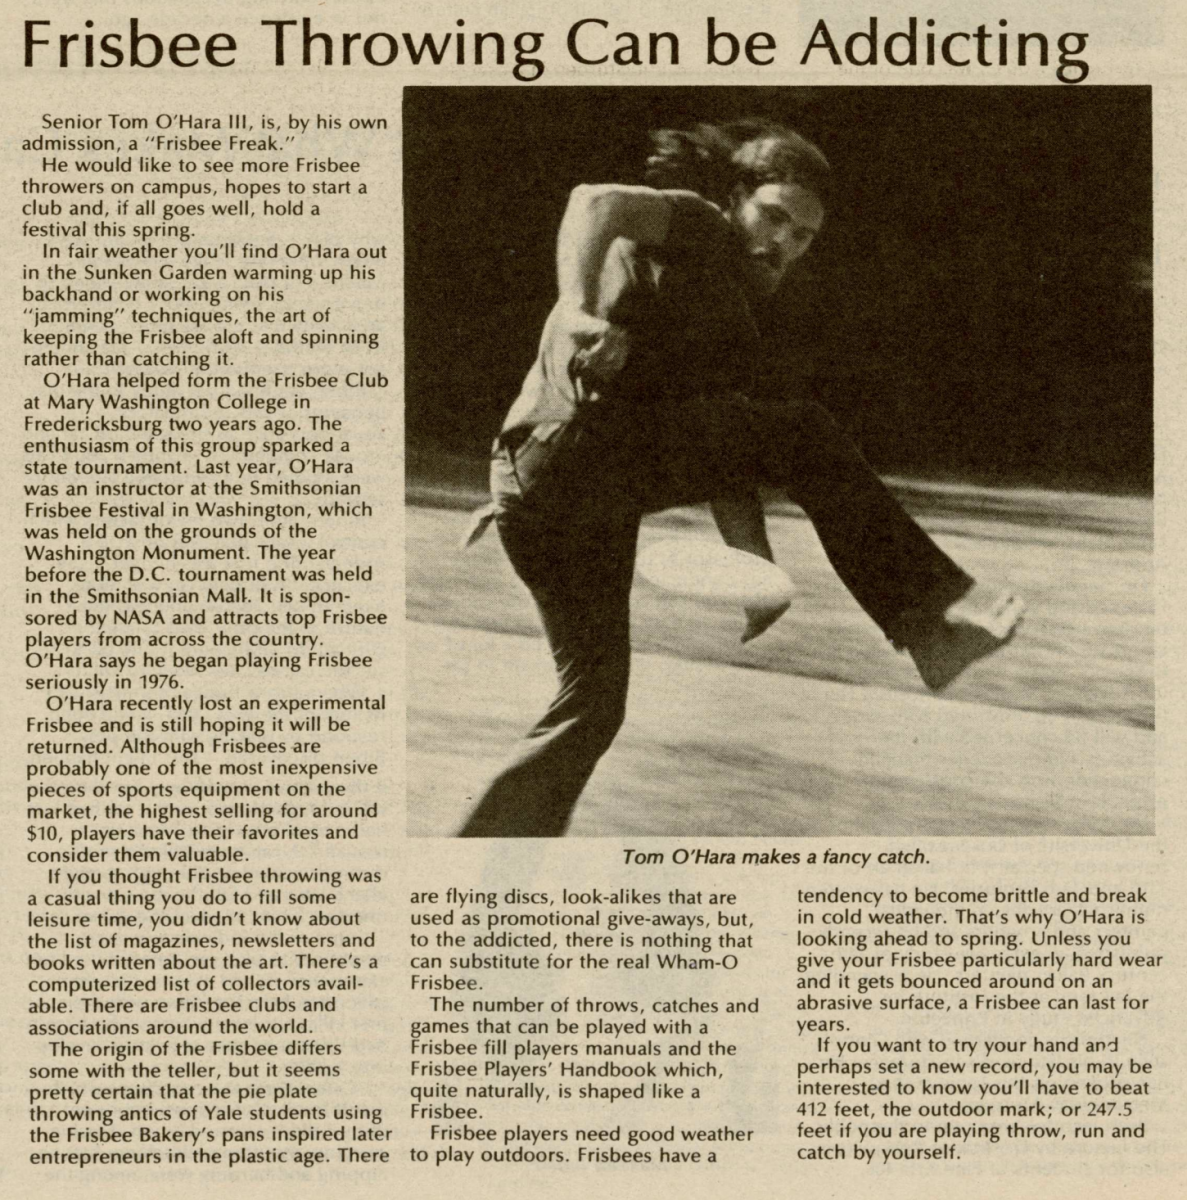 Article (page 6) from the November 14, 1978 copy of the William & Mary News. Title of article reads, "Frisbee Throwing Can be Addicting." Article features a photo of Senior Tom O'Hara III throwing a frisbee underneath his raised leg.